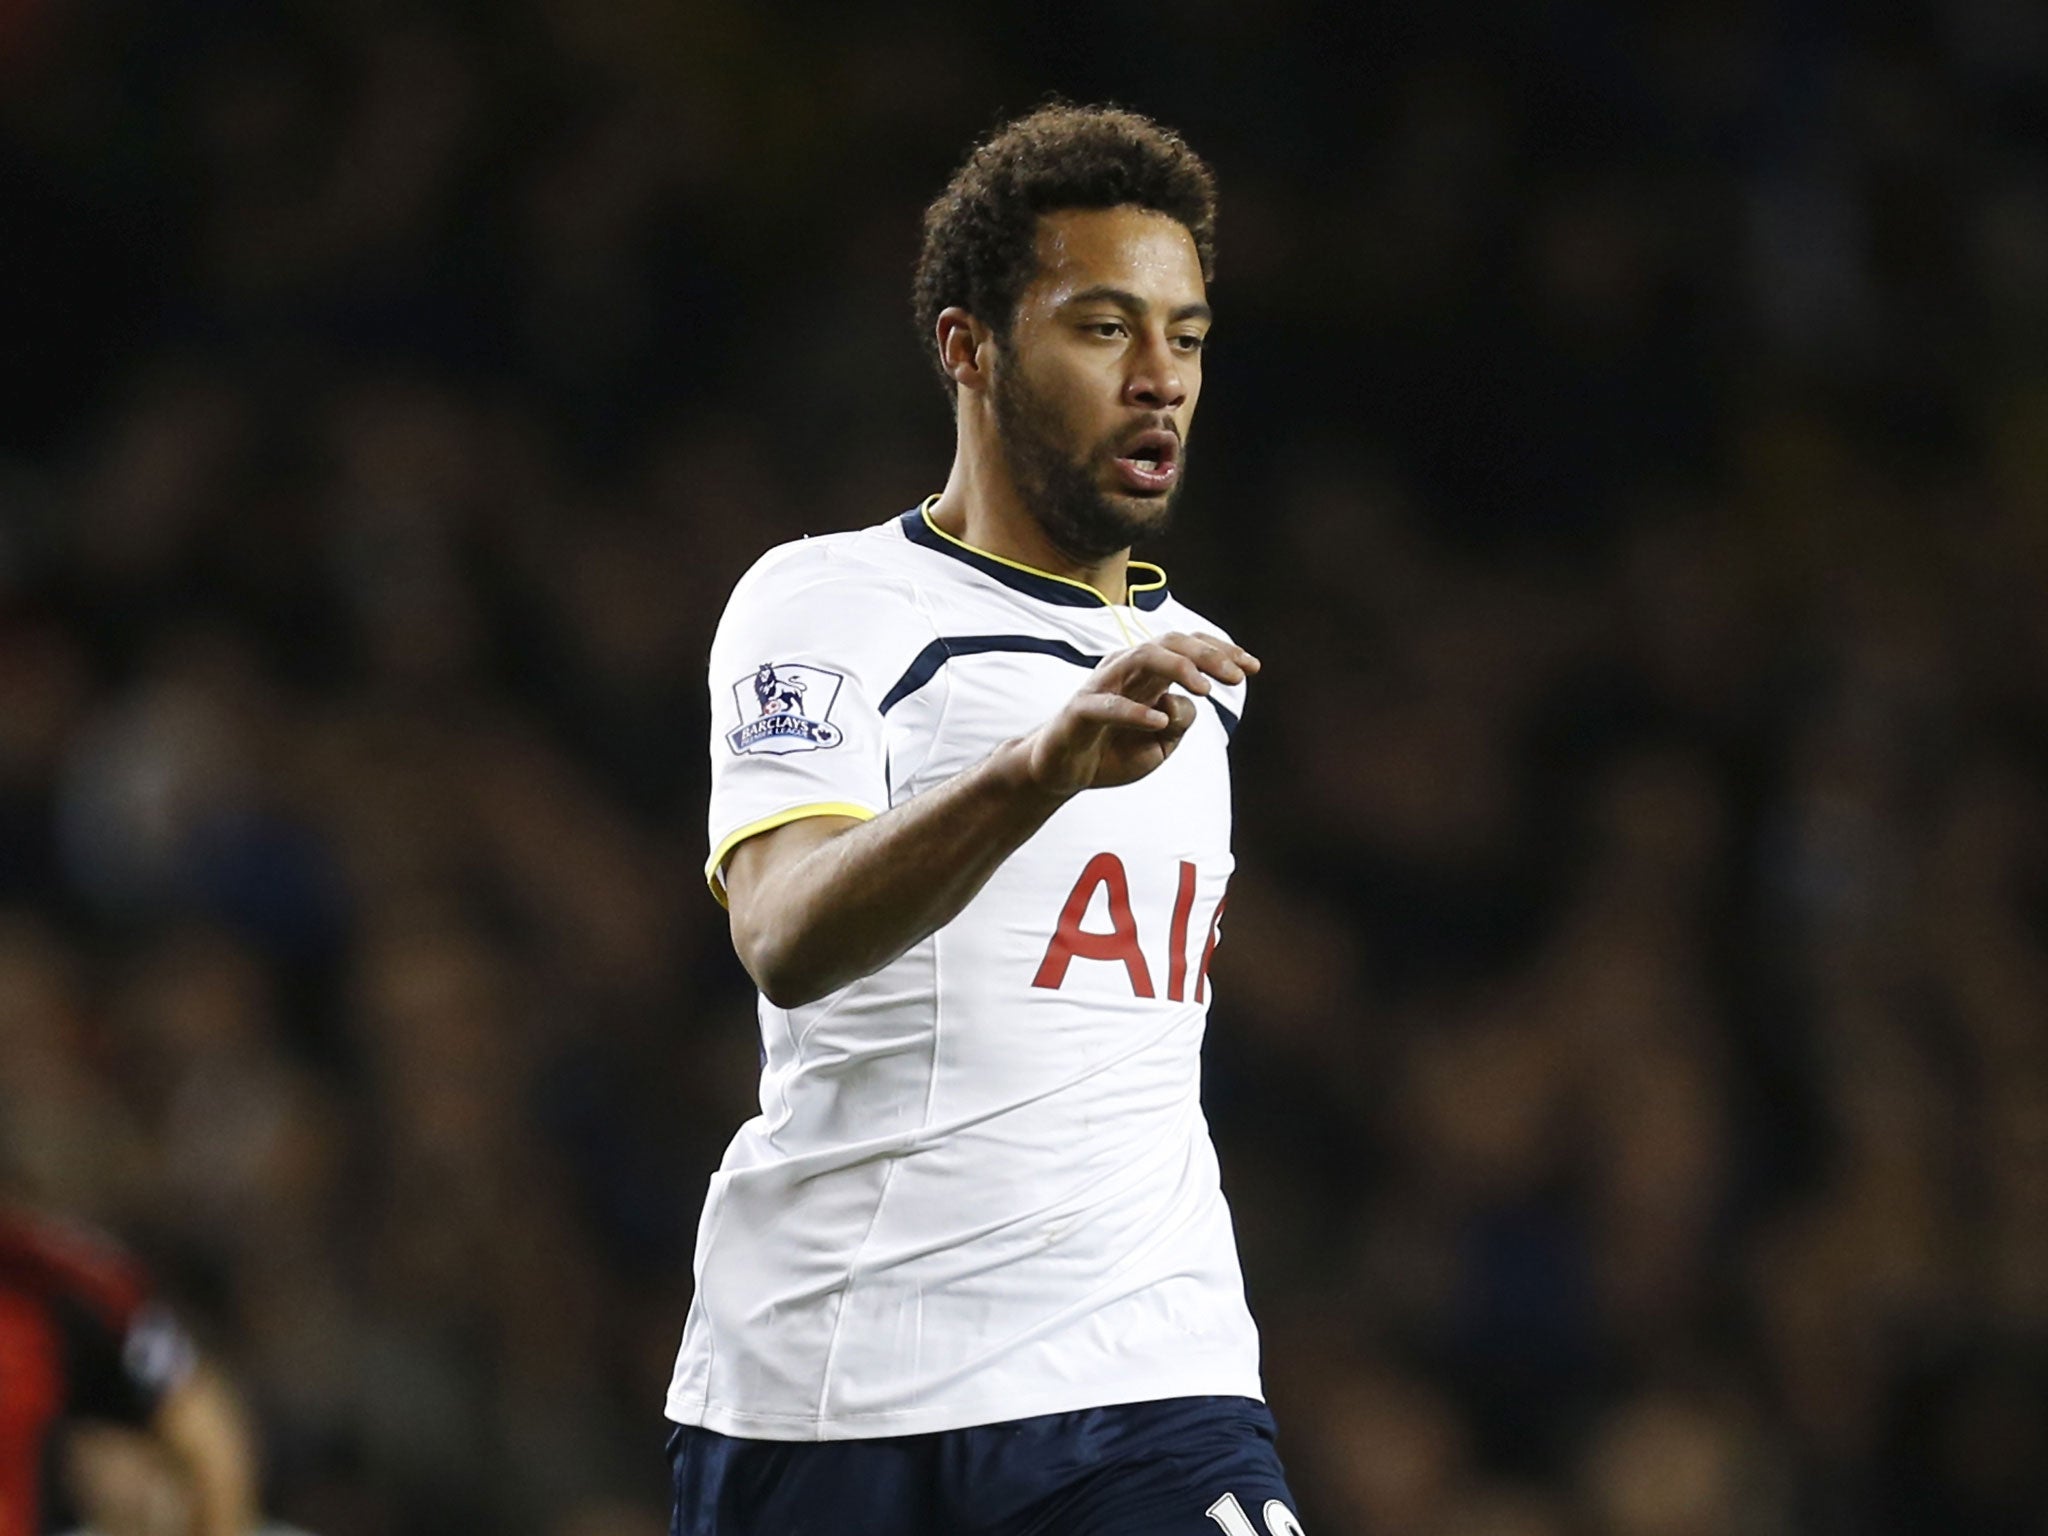 Mousa Dembele in action for Tottenham